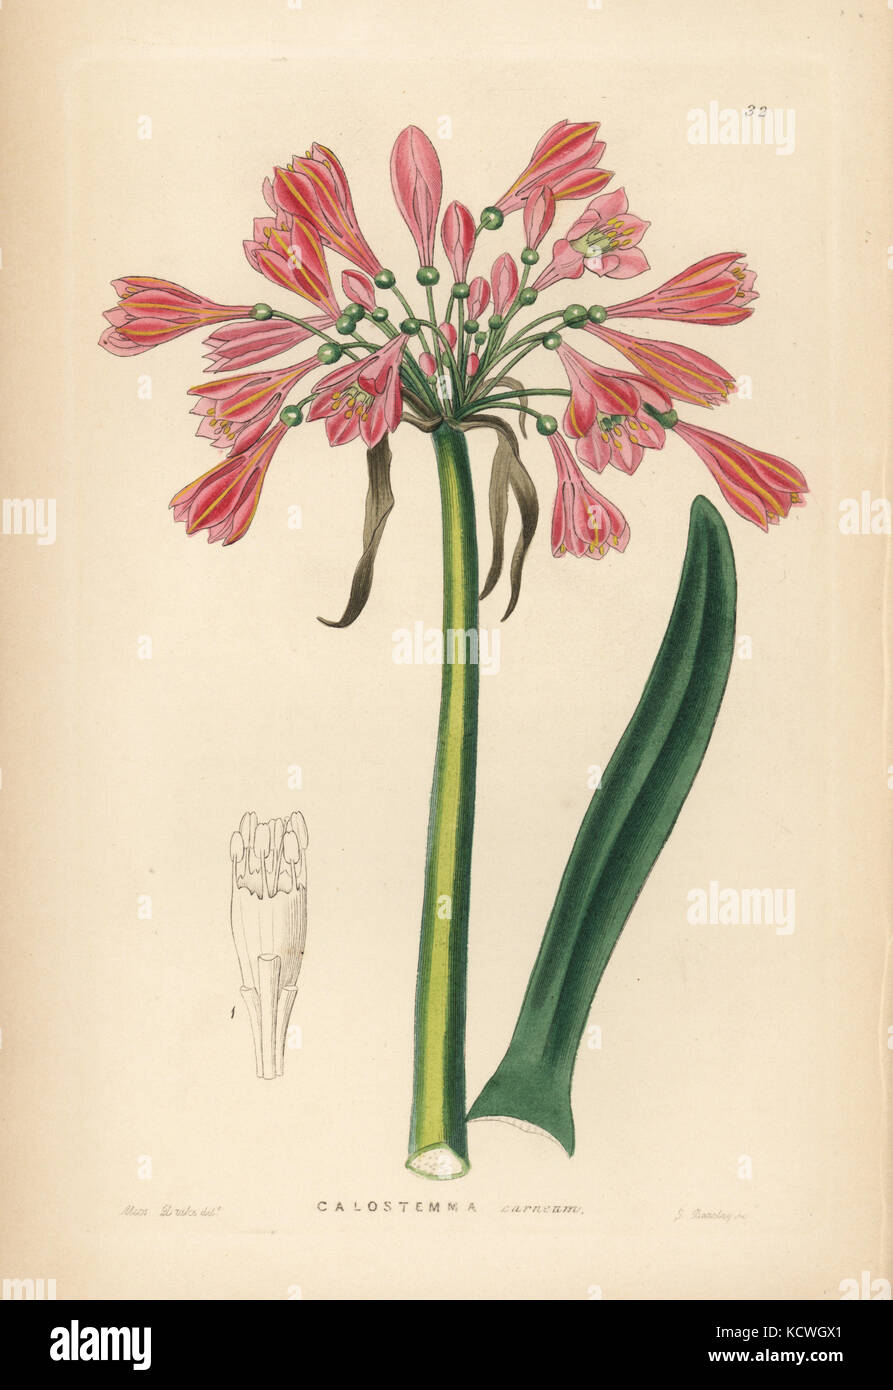 Garland lily, Calostemma purpureum (Flesh-coloured calostemma, Calostemma carneum). Handcoloured copperplate engraving by G. Barclay after Miss Sarah Drake from John Lindley and Robert Sweet's Ornamental Flower Garden and Shrubbery, G. Willis, London, 1854. Stock Photo